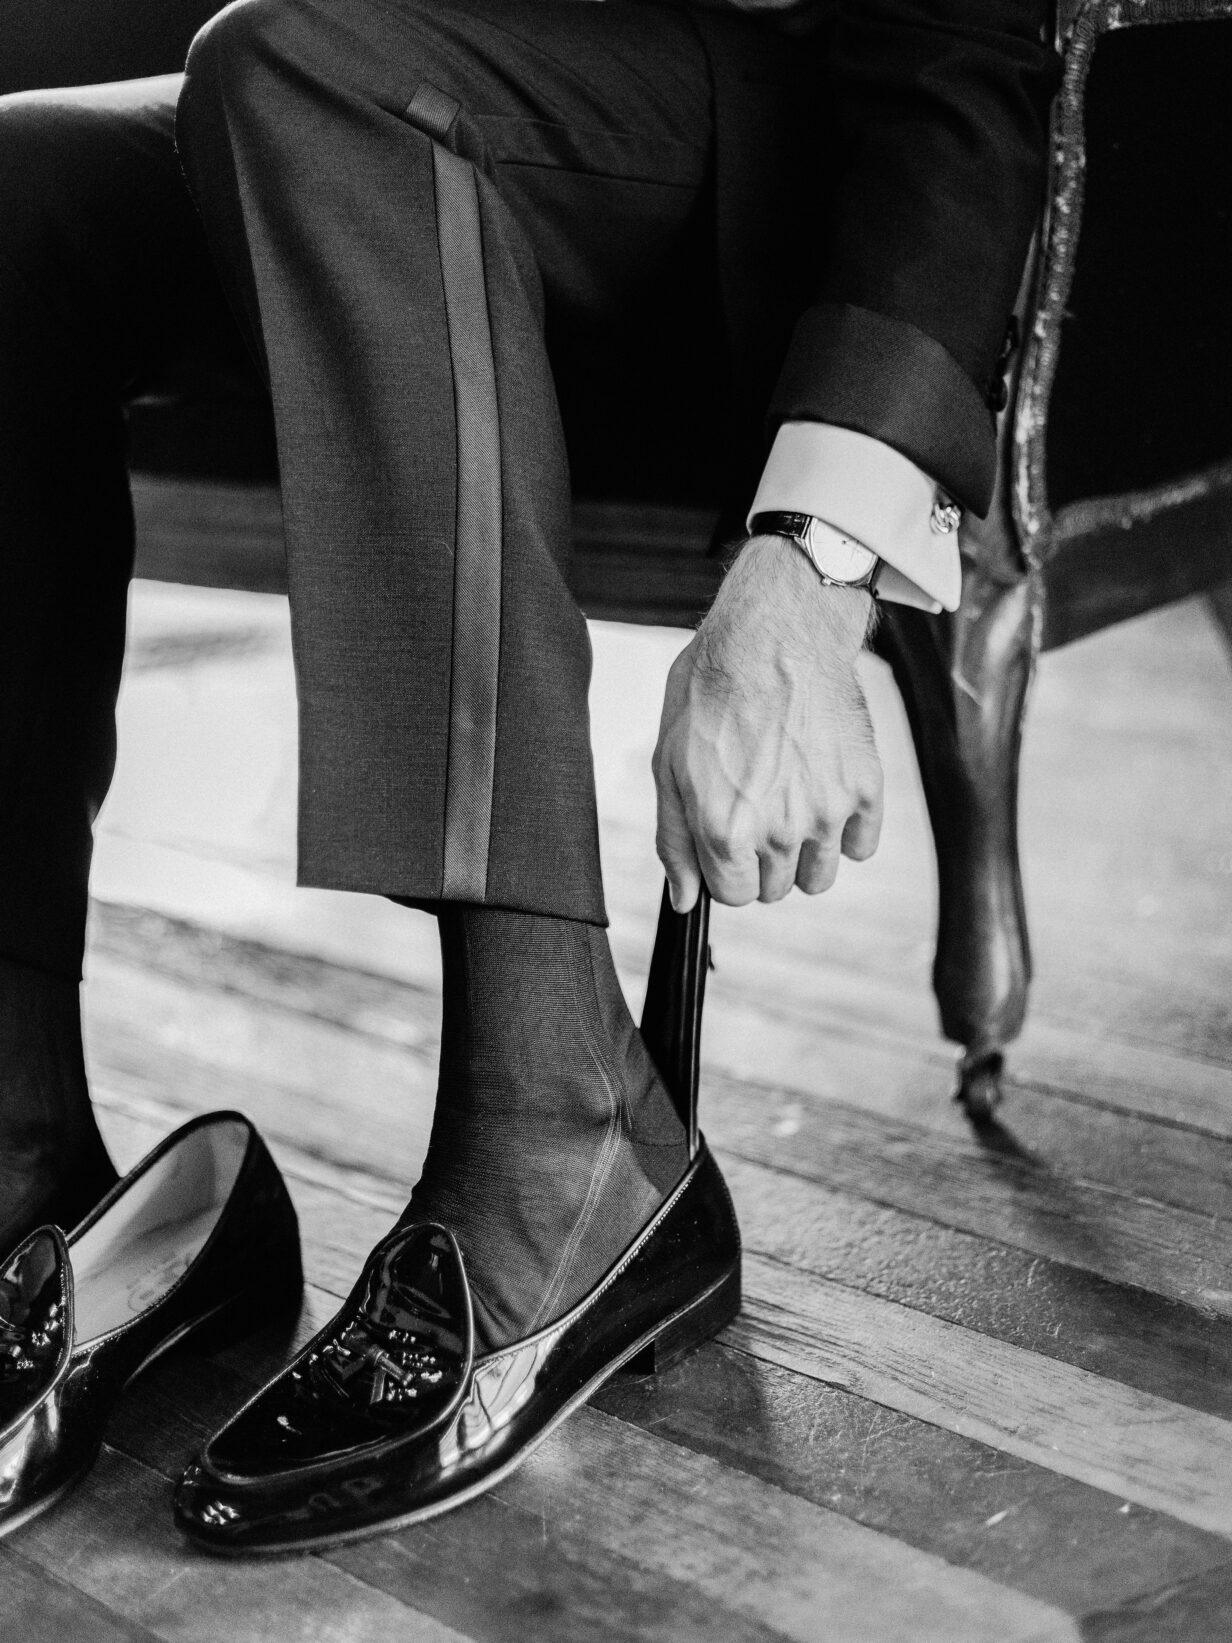 Formal Shoes For Men: What You Should Know